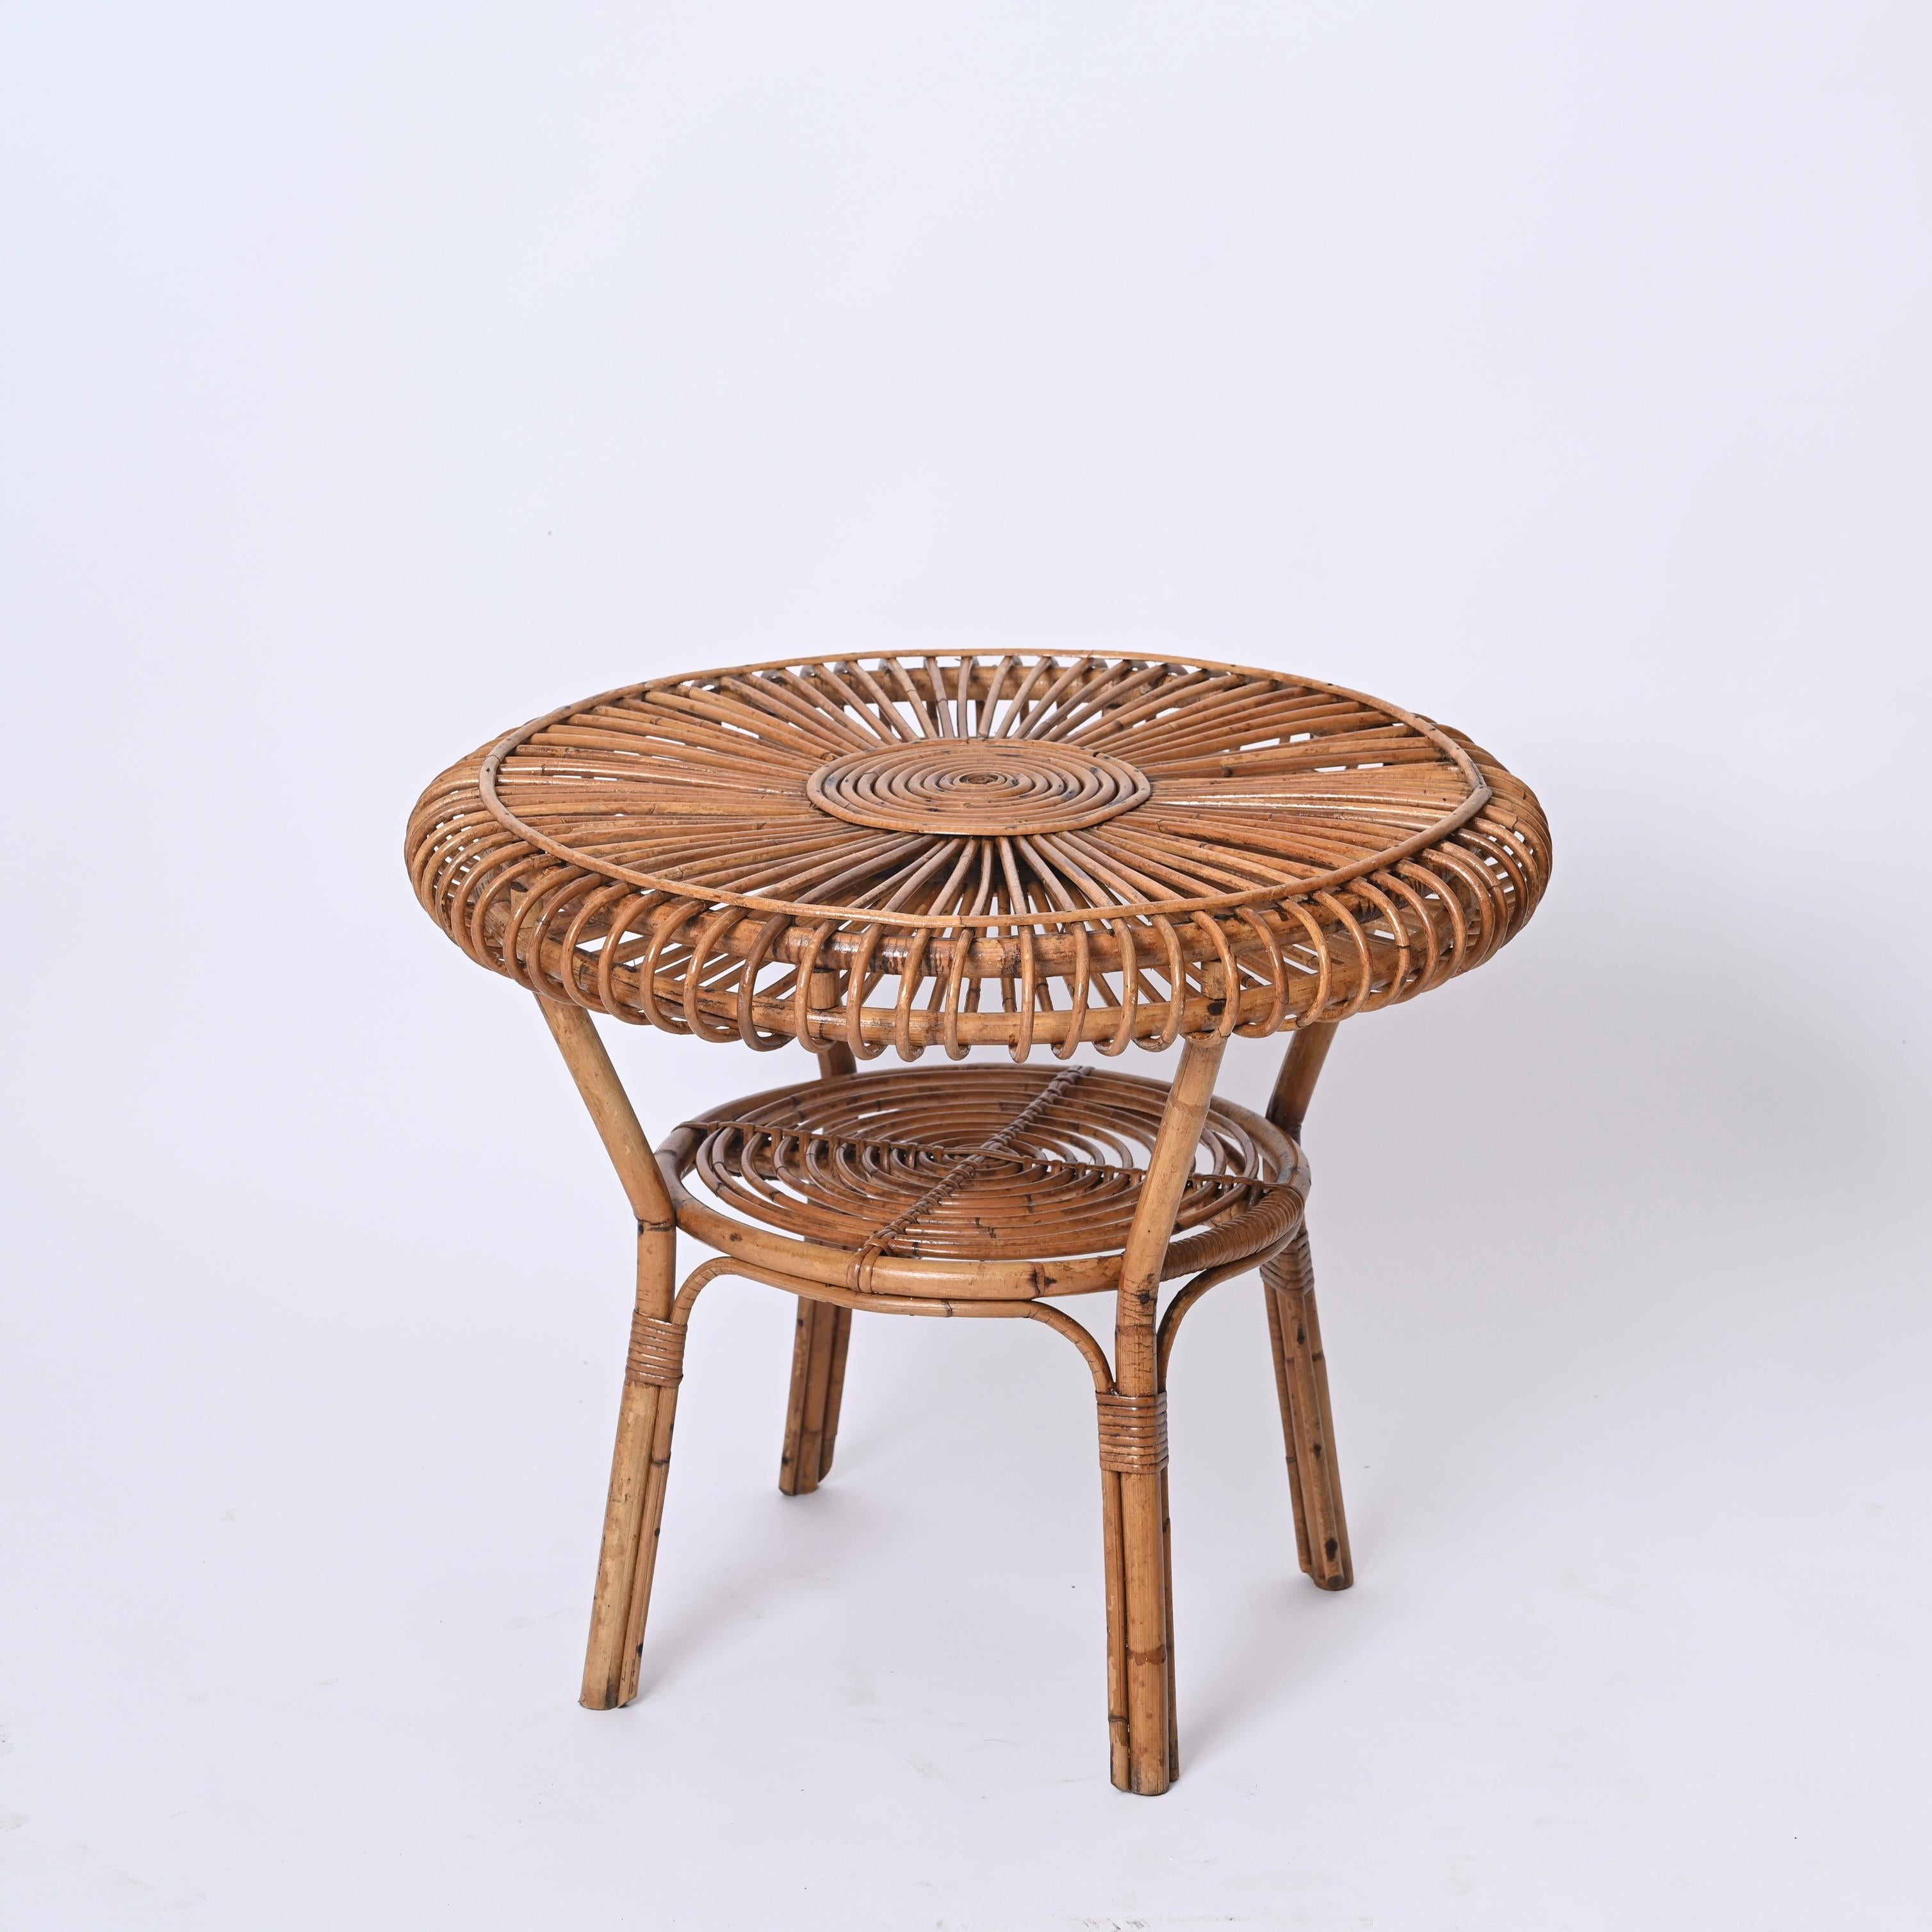 MidCentury Italian Round Coffee Table in Rattan and Bamboo, Italy 1960s For Sale 5